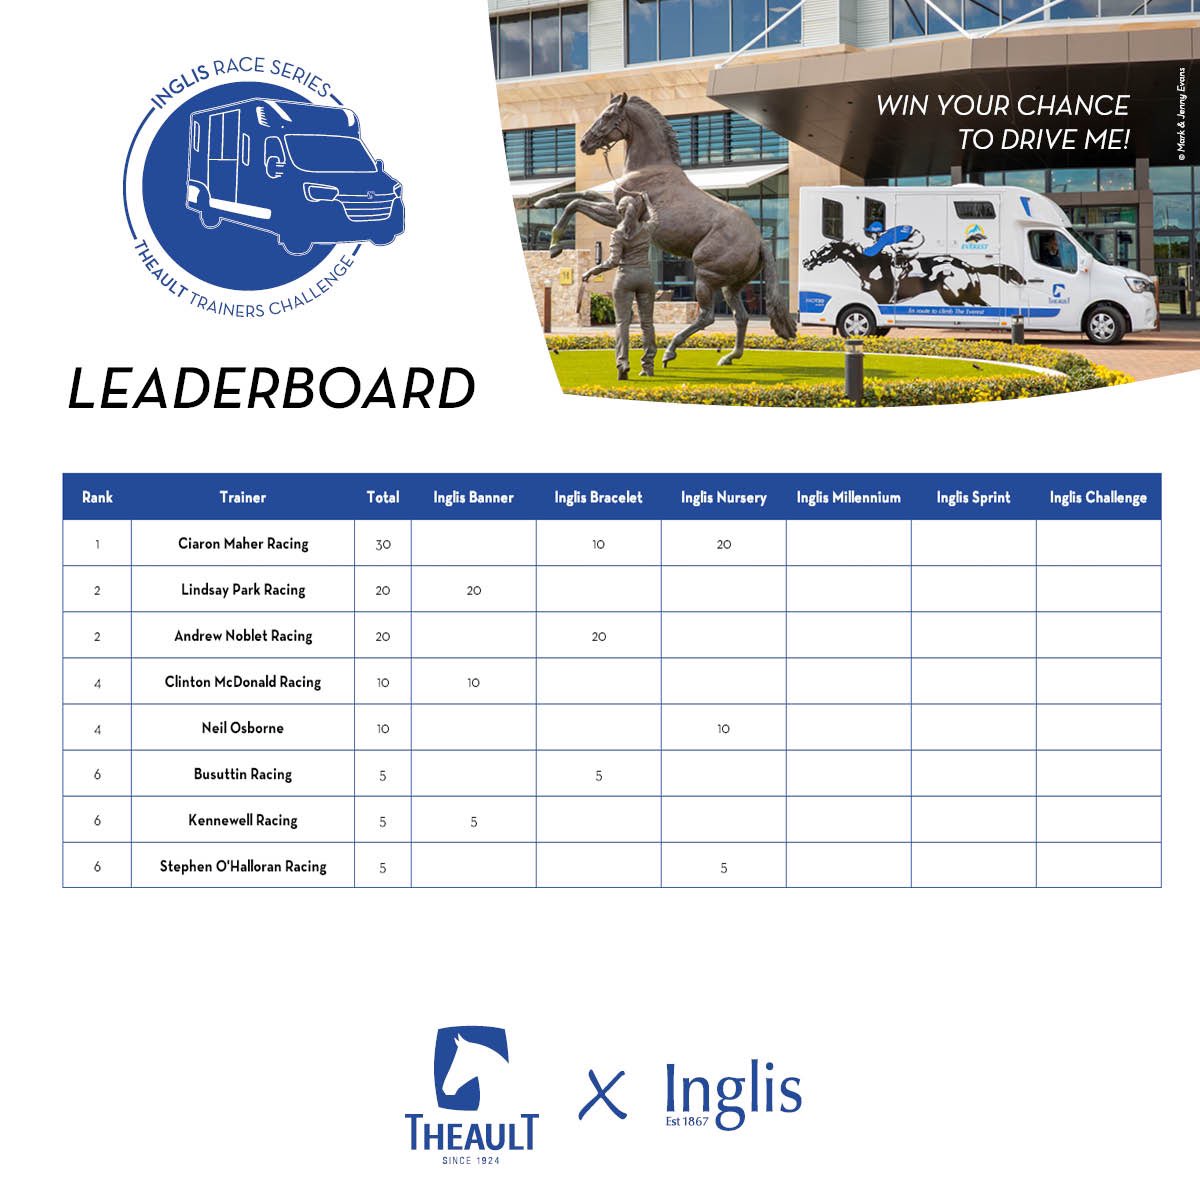 We’re already halfway through the Inglis Race Series! Like last year, @cmaherracing just claimed the Inglis Nursery and hit the lead in the Theault Trainer’s Challenge.
A Theault’s van will be leased to the most successful trainer for 6 months! Who will be the lucky winner ? 🍀